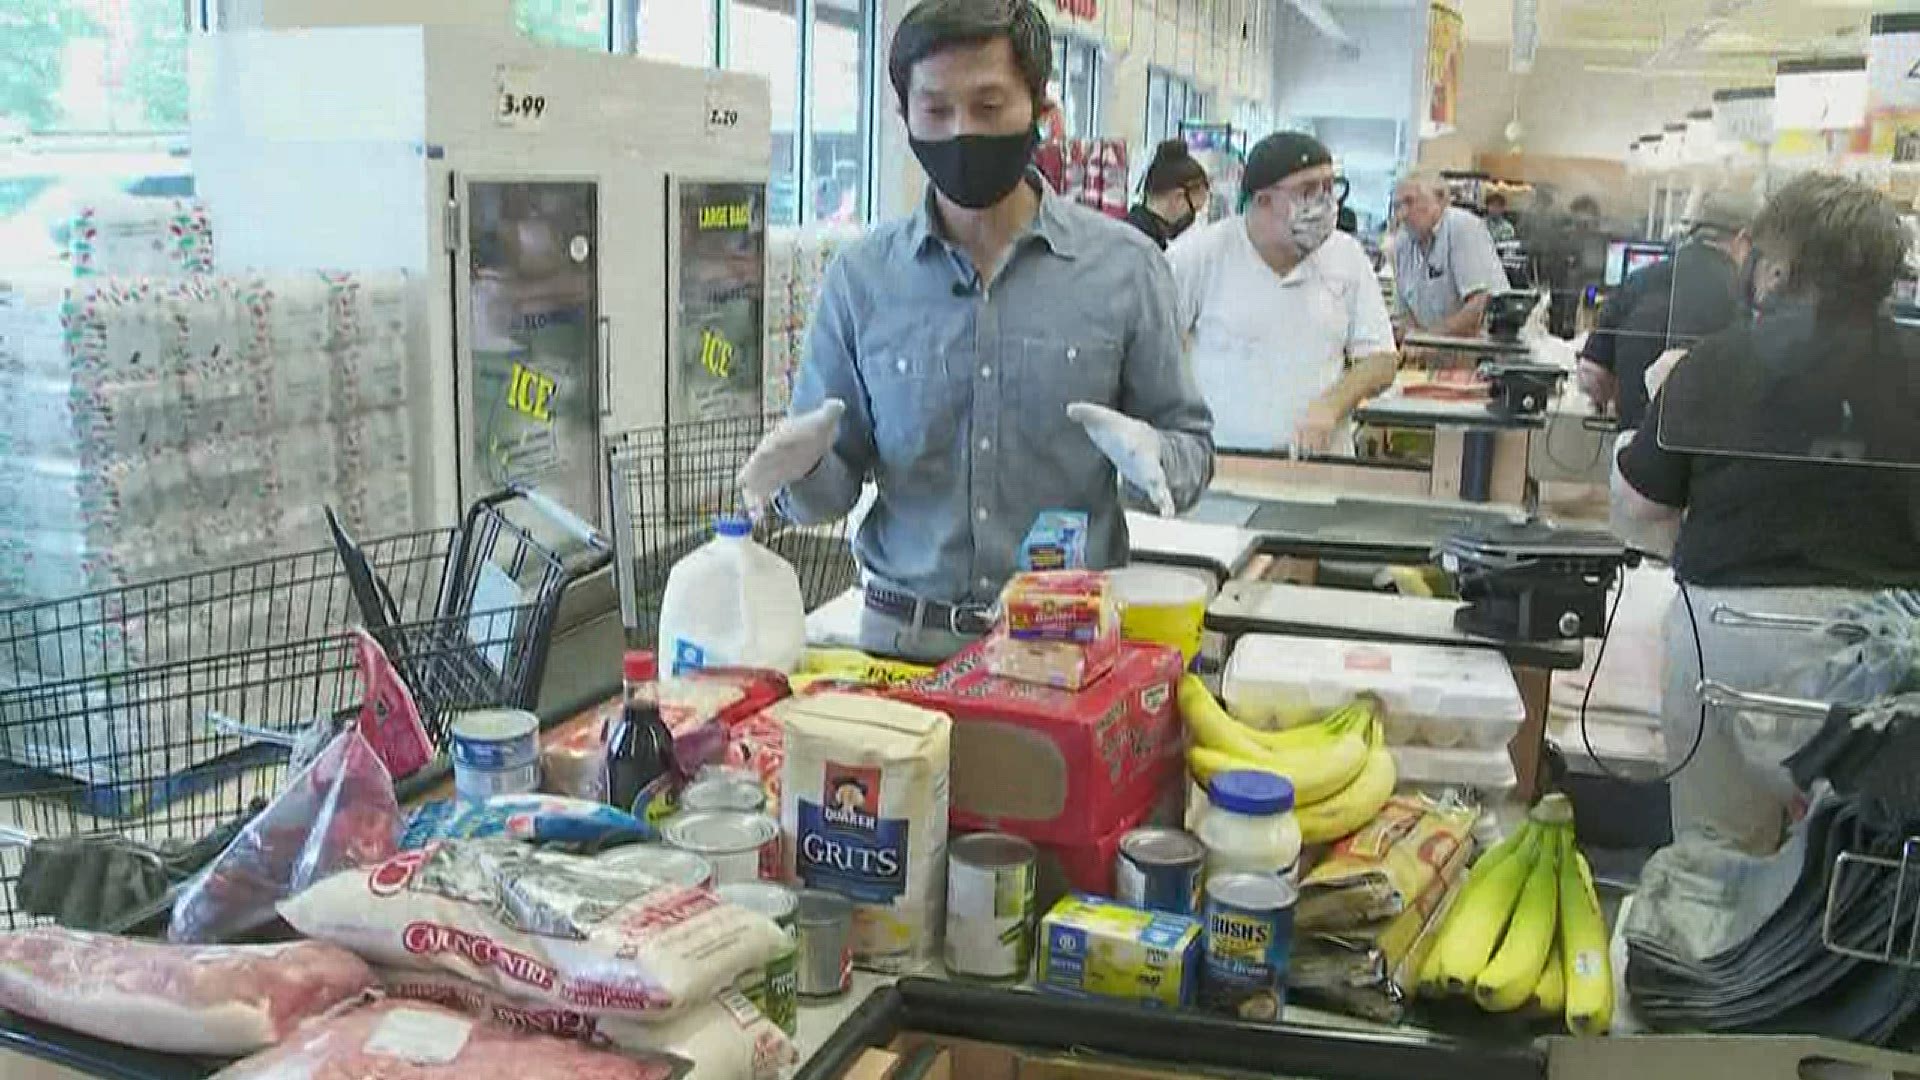 Thanh Truong shows a way to shop thrifty on a SNAP-style budget to feed a family of 4 for a week.